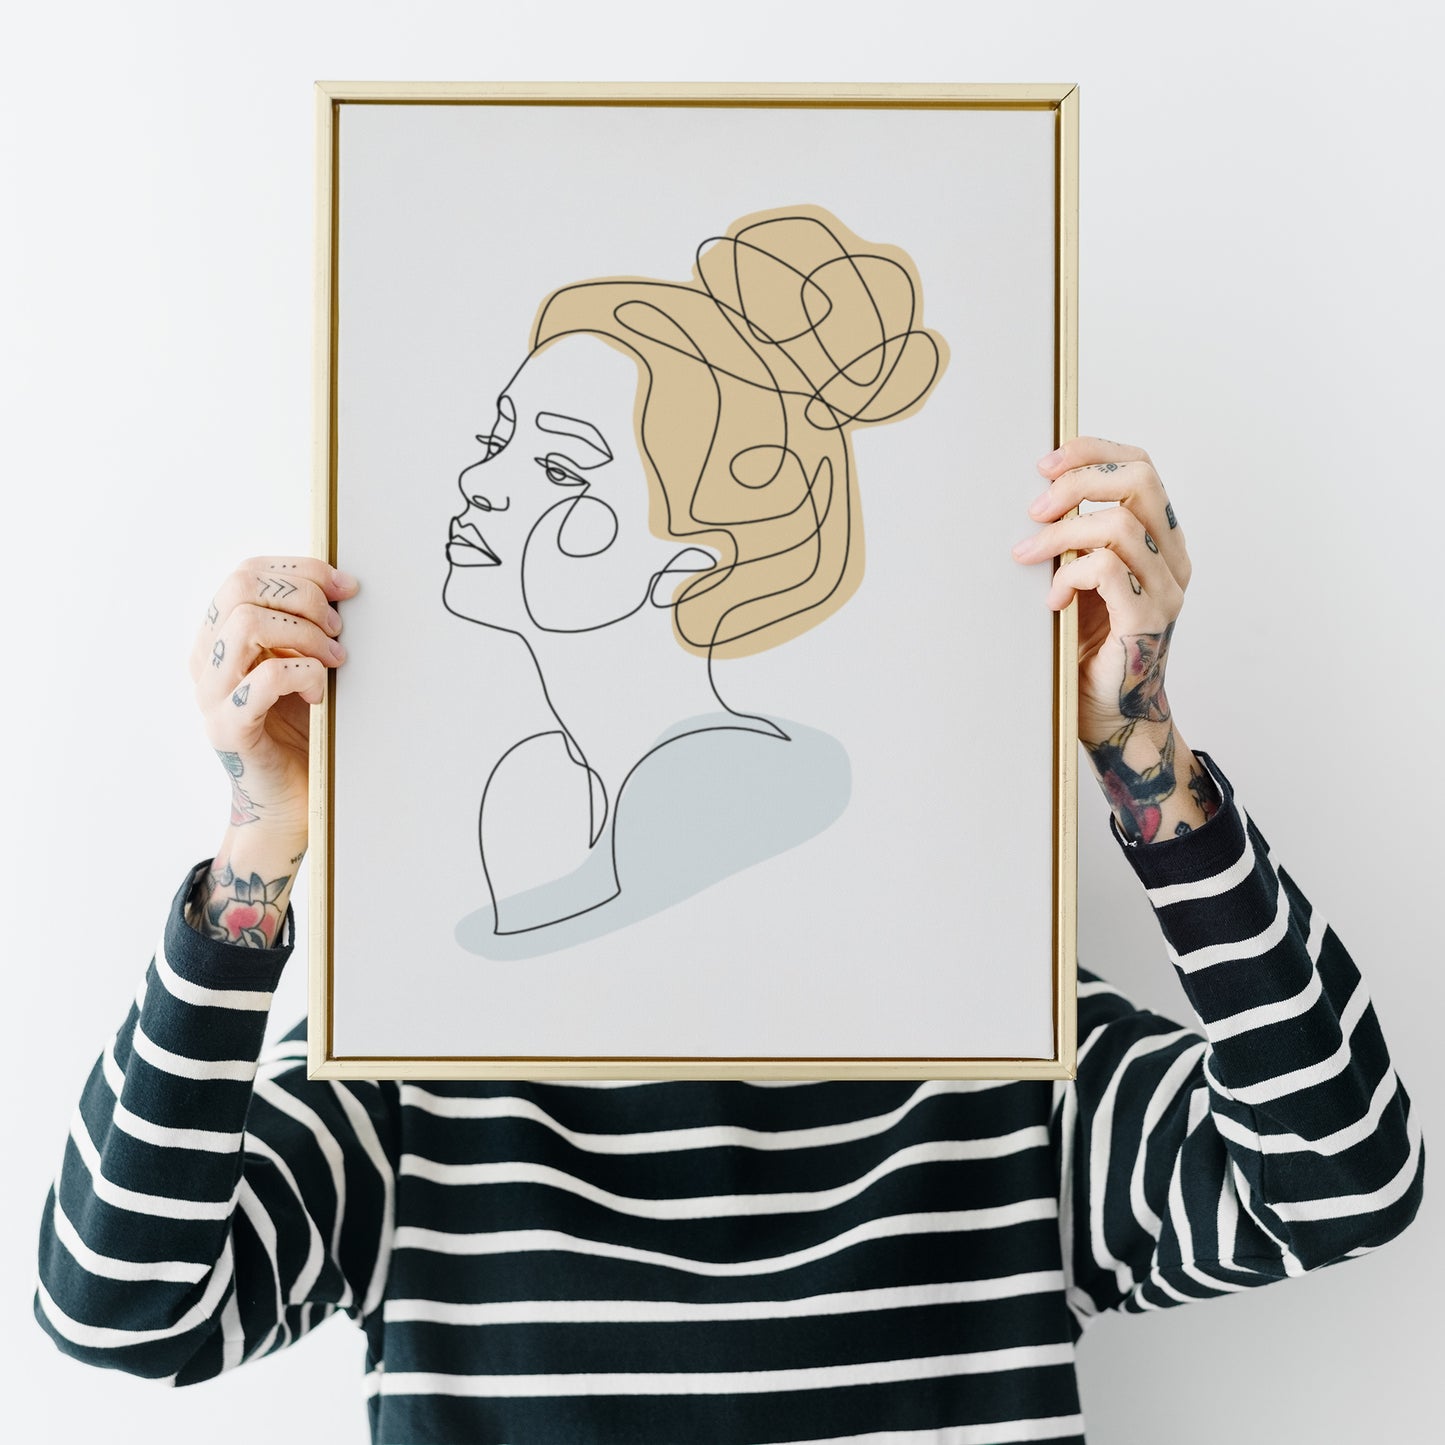 Single Line Face Drawing Poster